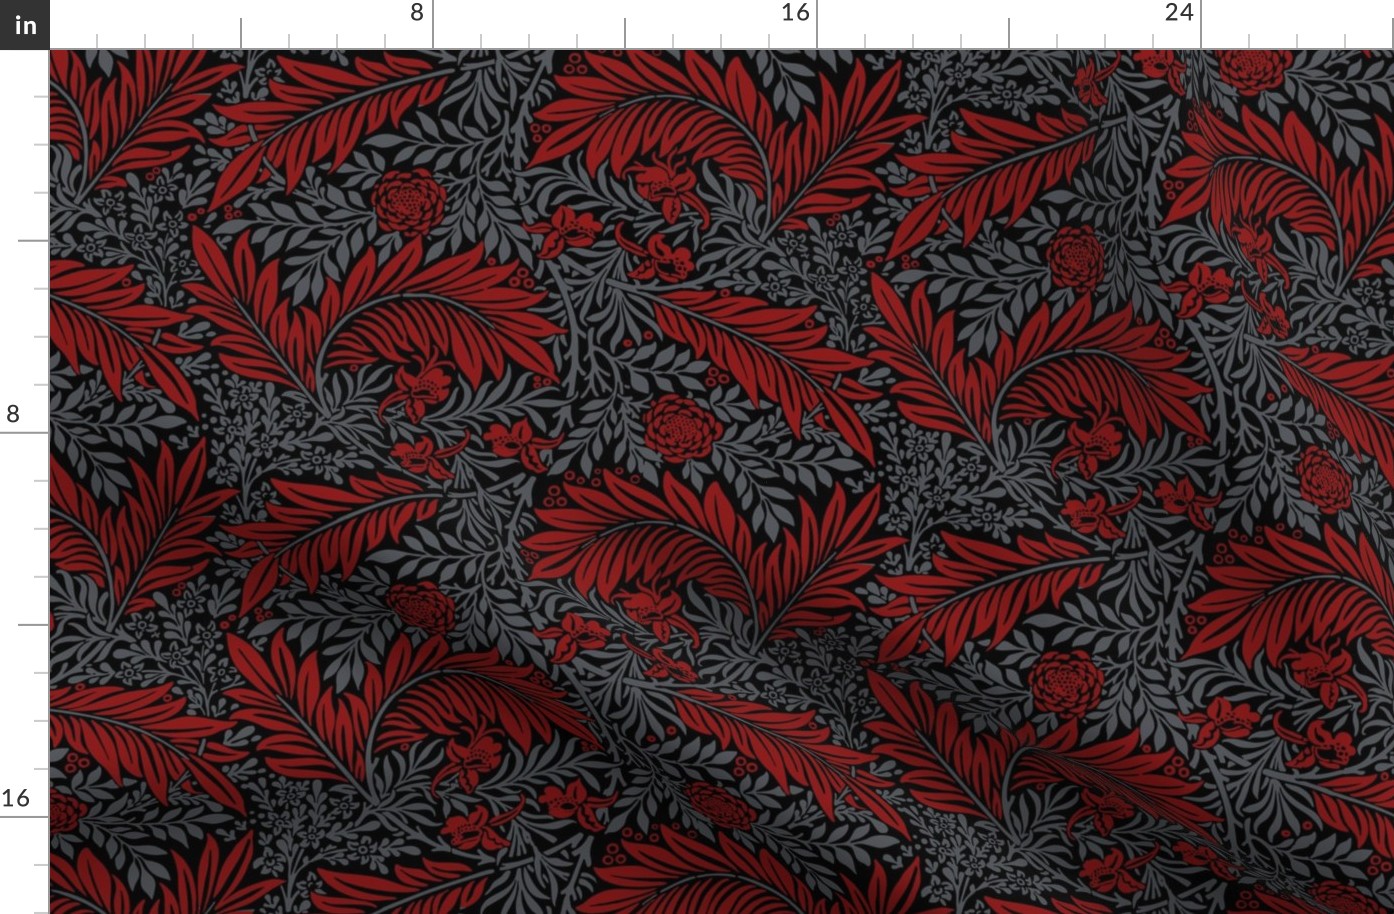 1874 William Morris "Larkspur" - Stanford colors - Cardinal and Cool Gray on Black